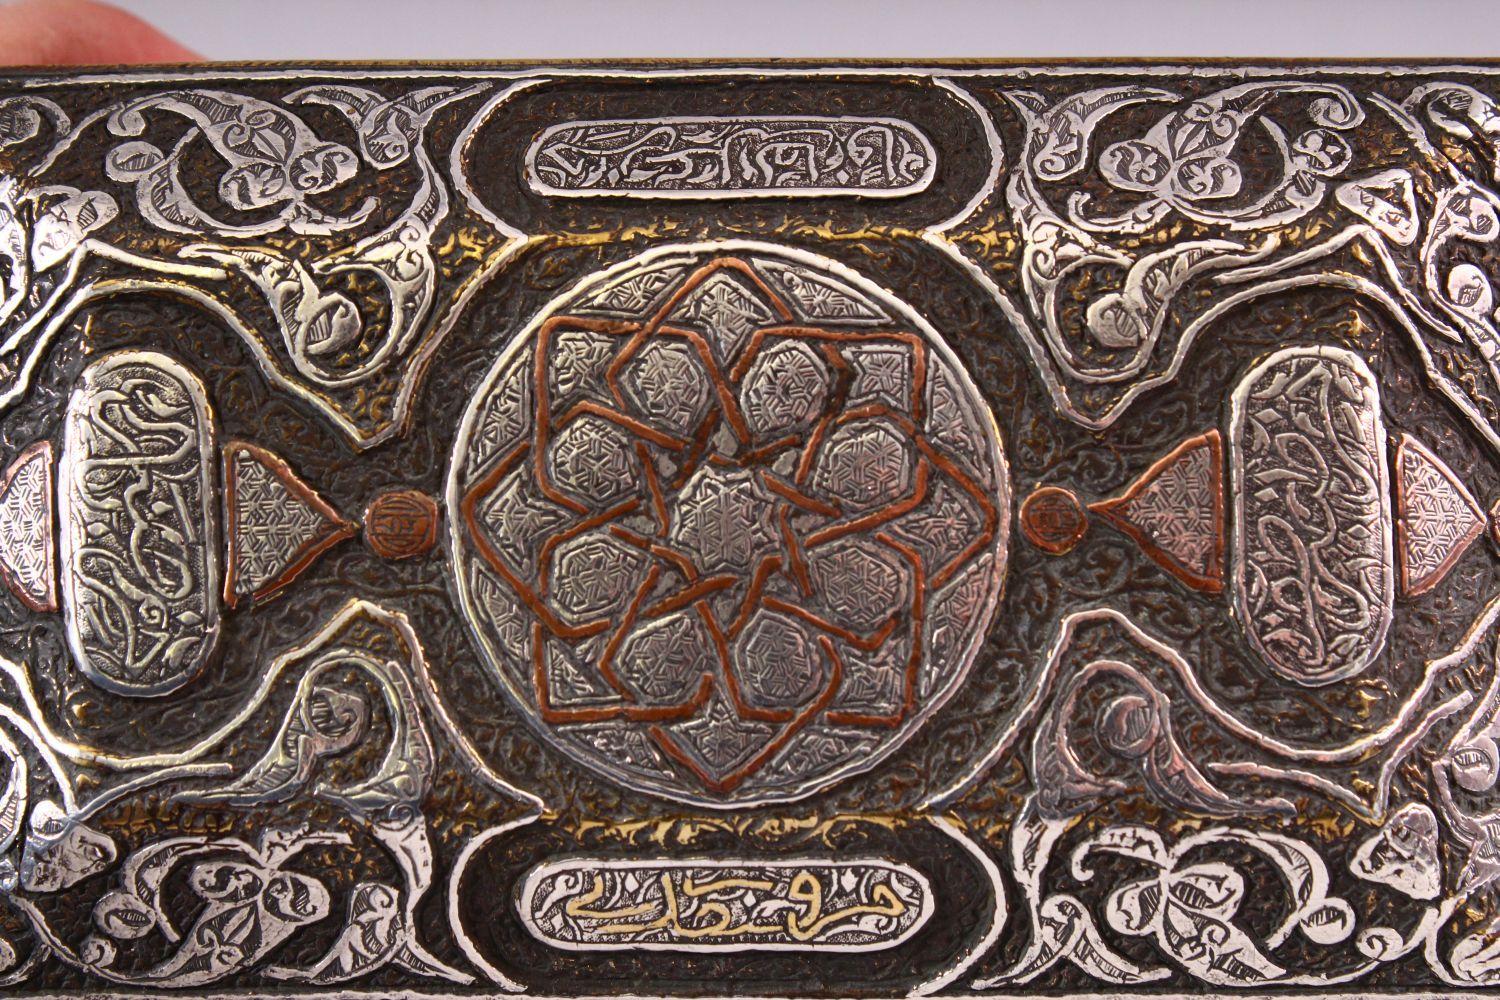 A GOOD 19TH CENTURY SYRIAN SILVER, COPPER AND BRASS RECTANGULAR CASKET, with panels of calligraphy - Image 4 of 10